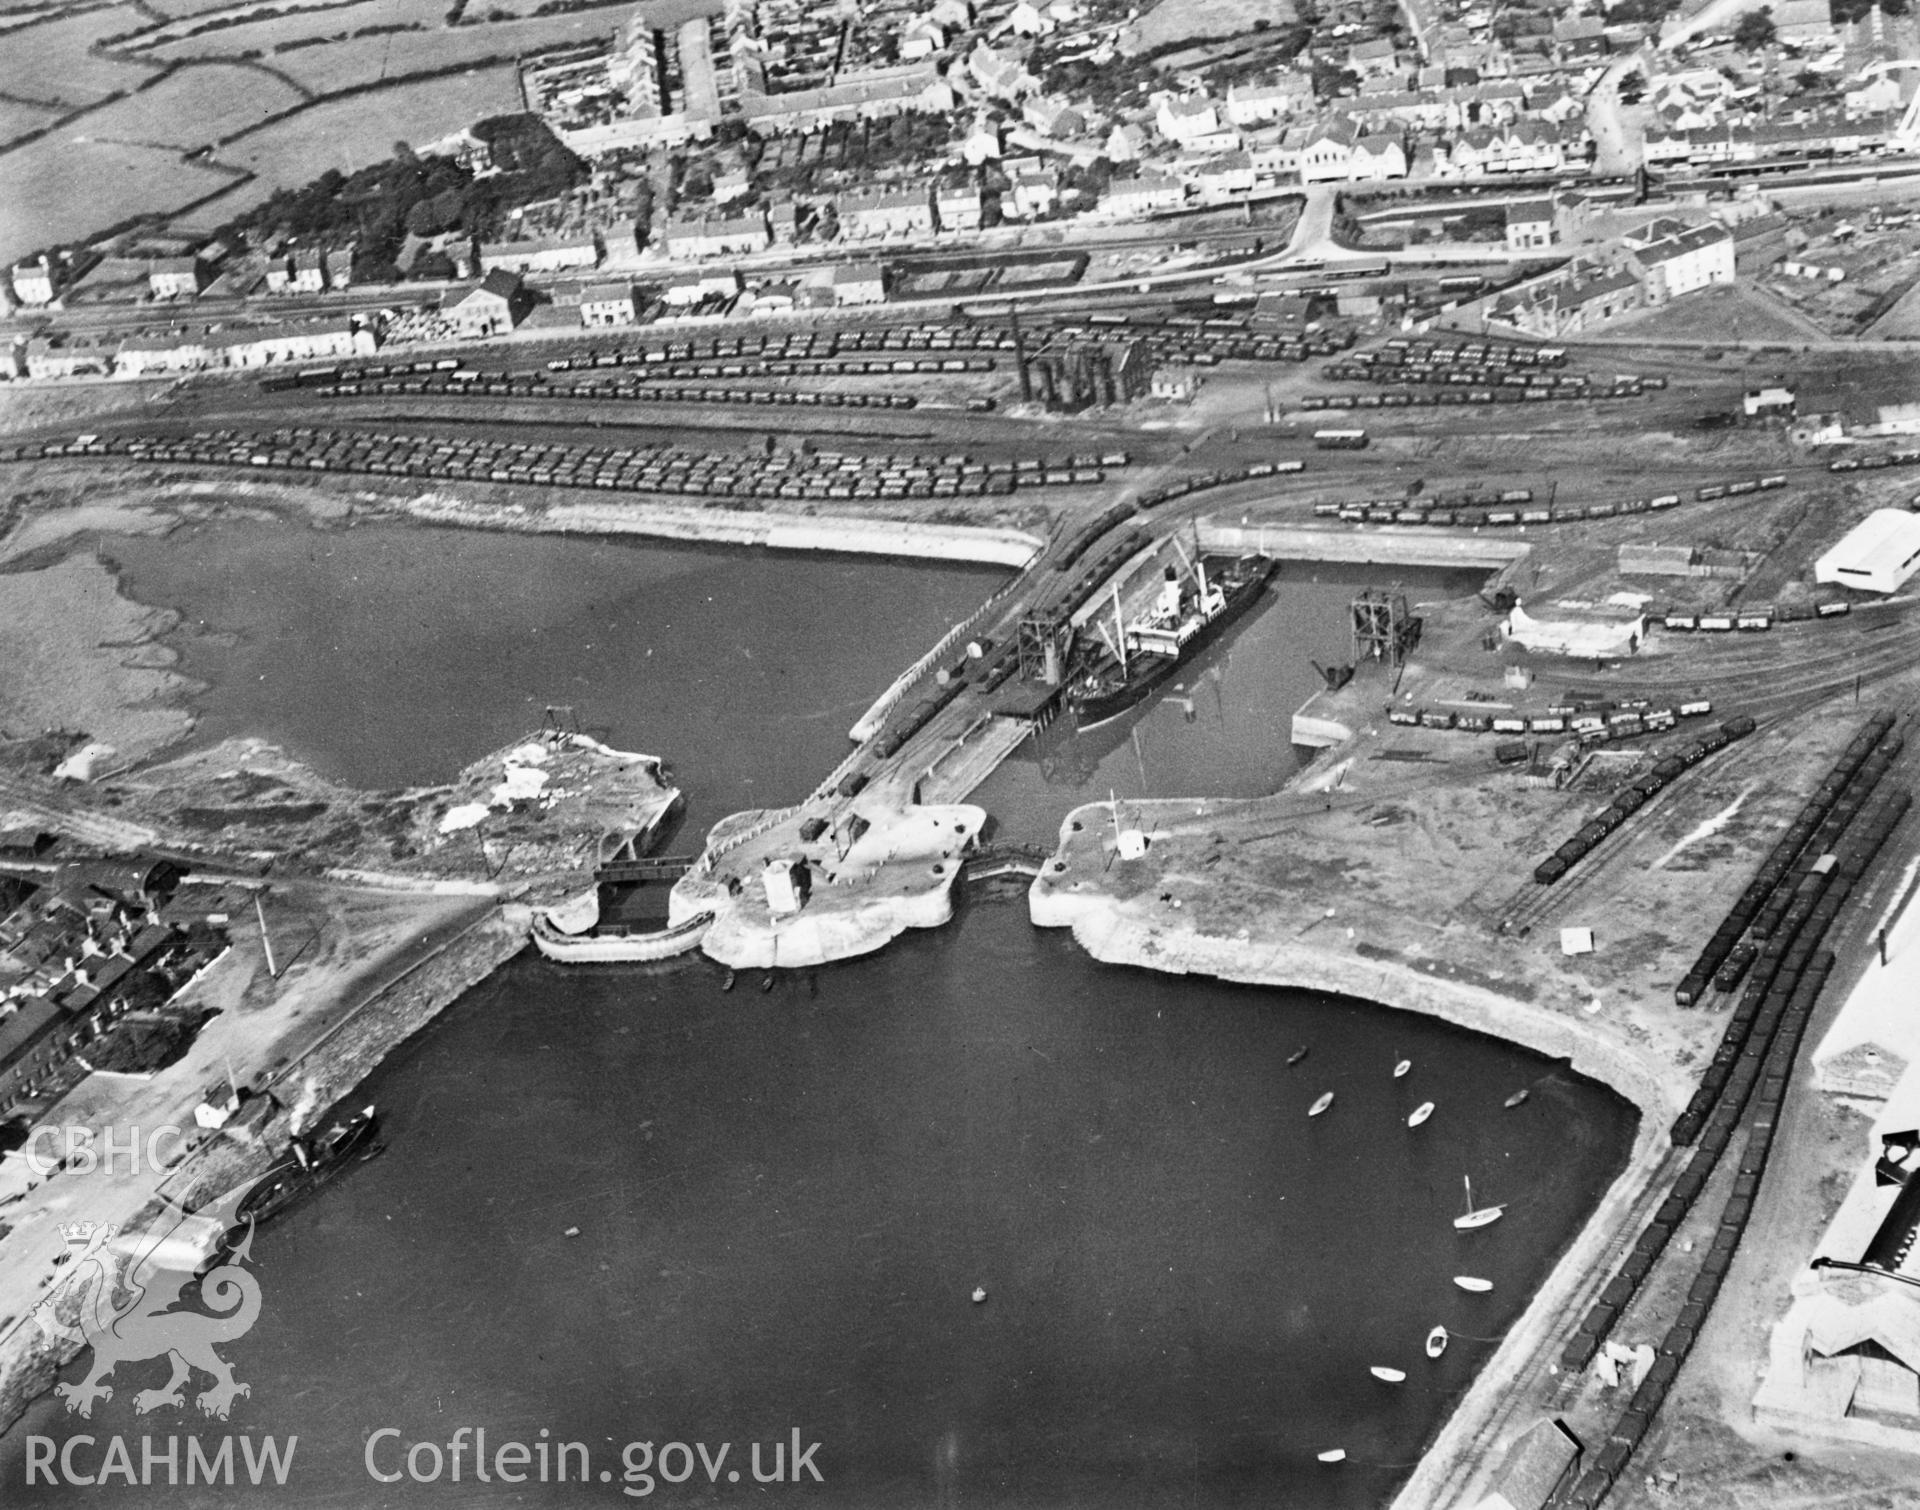 View of Burry Port Harbour and railway station. Oblique aerial photograph, 5?x4? BW glass plate.